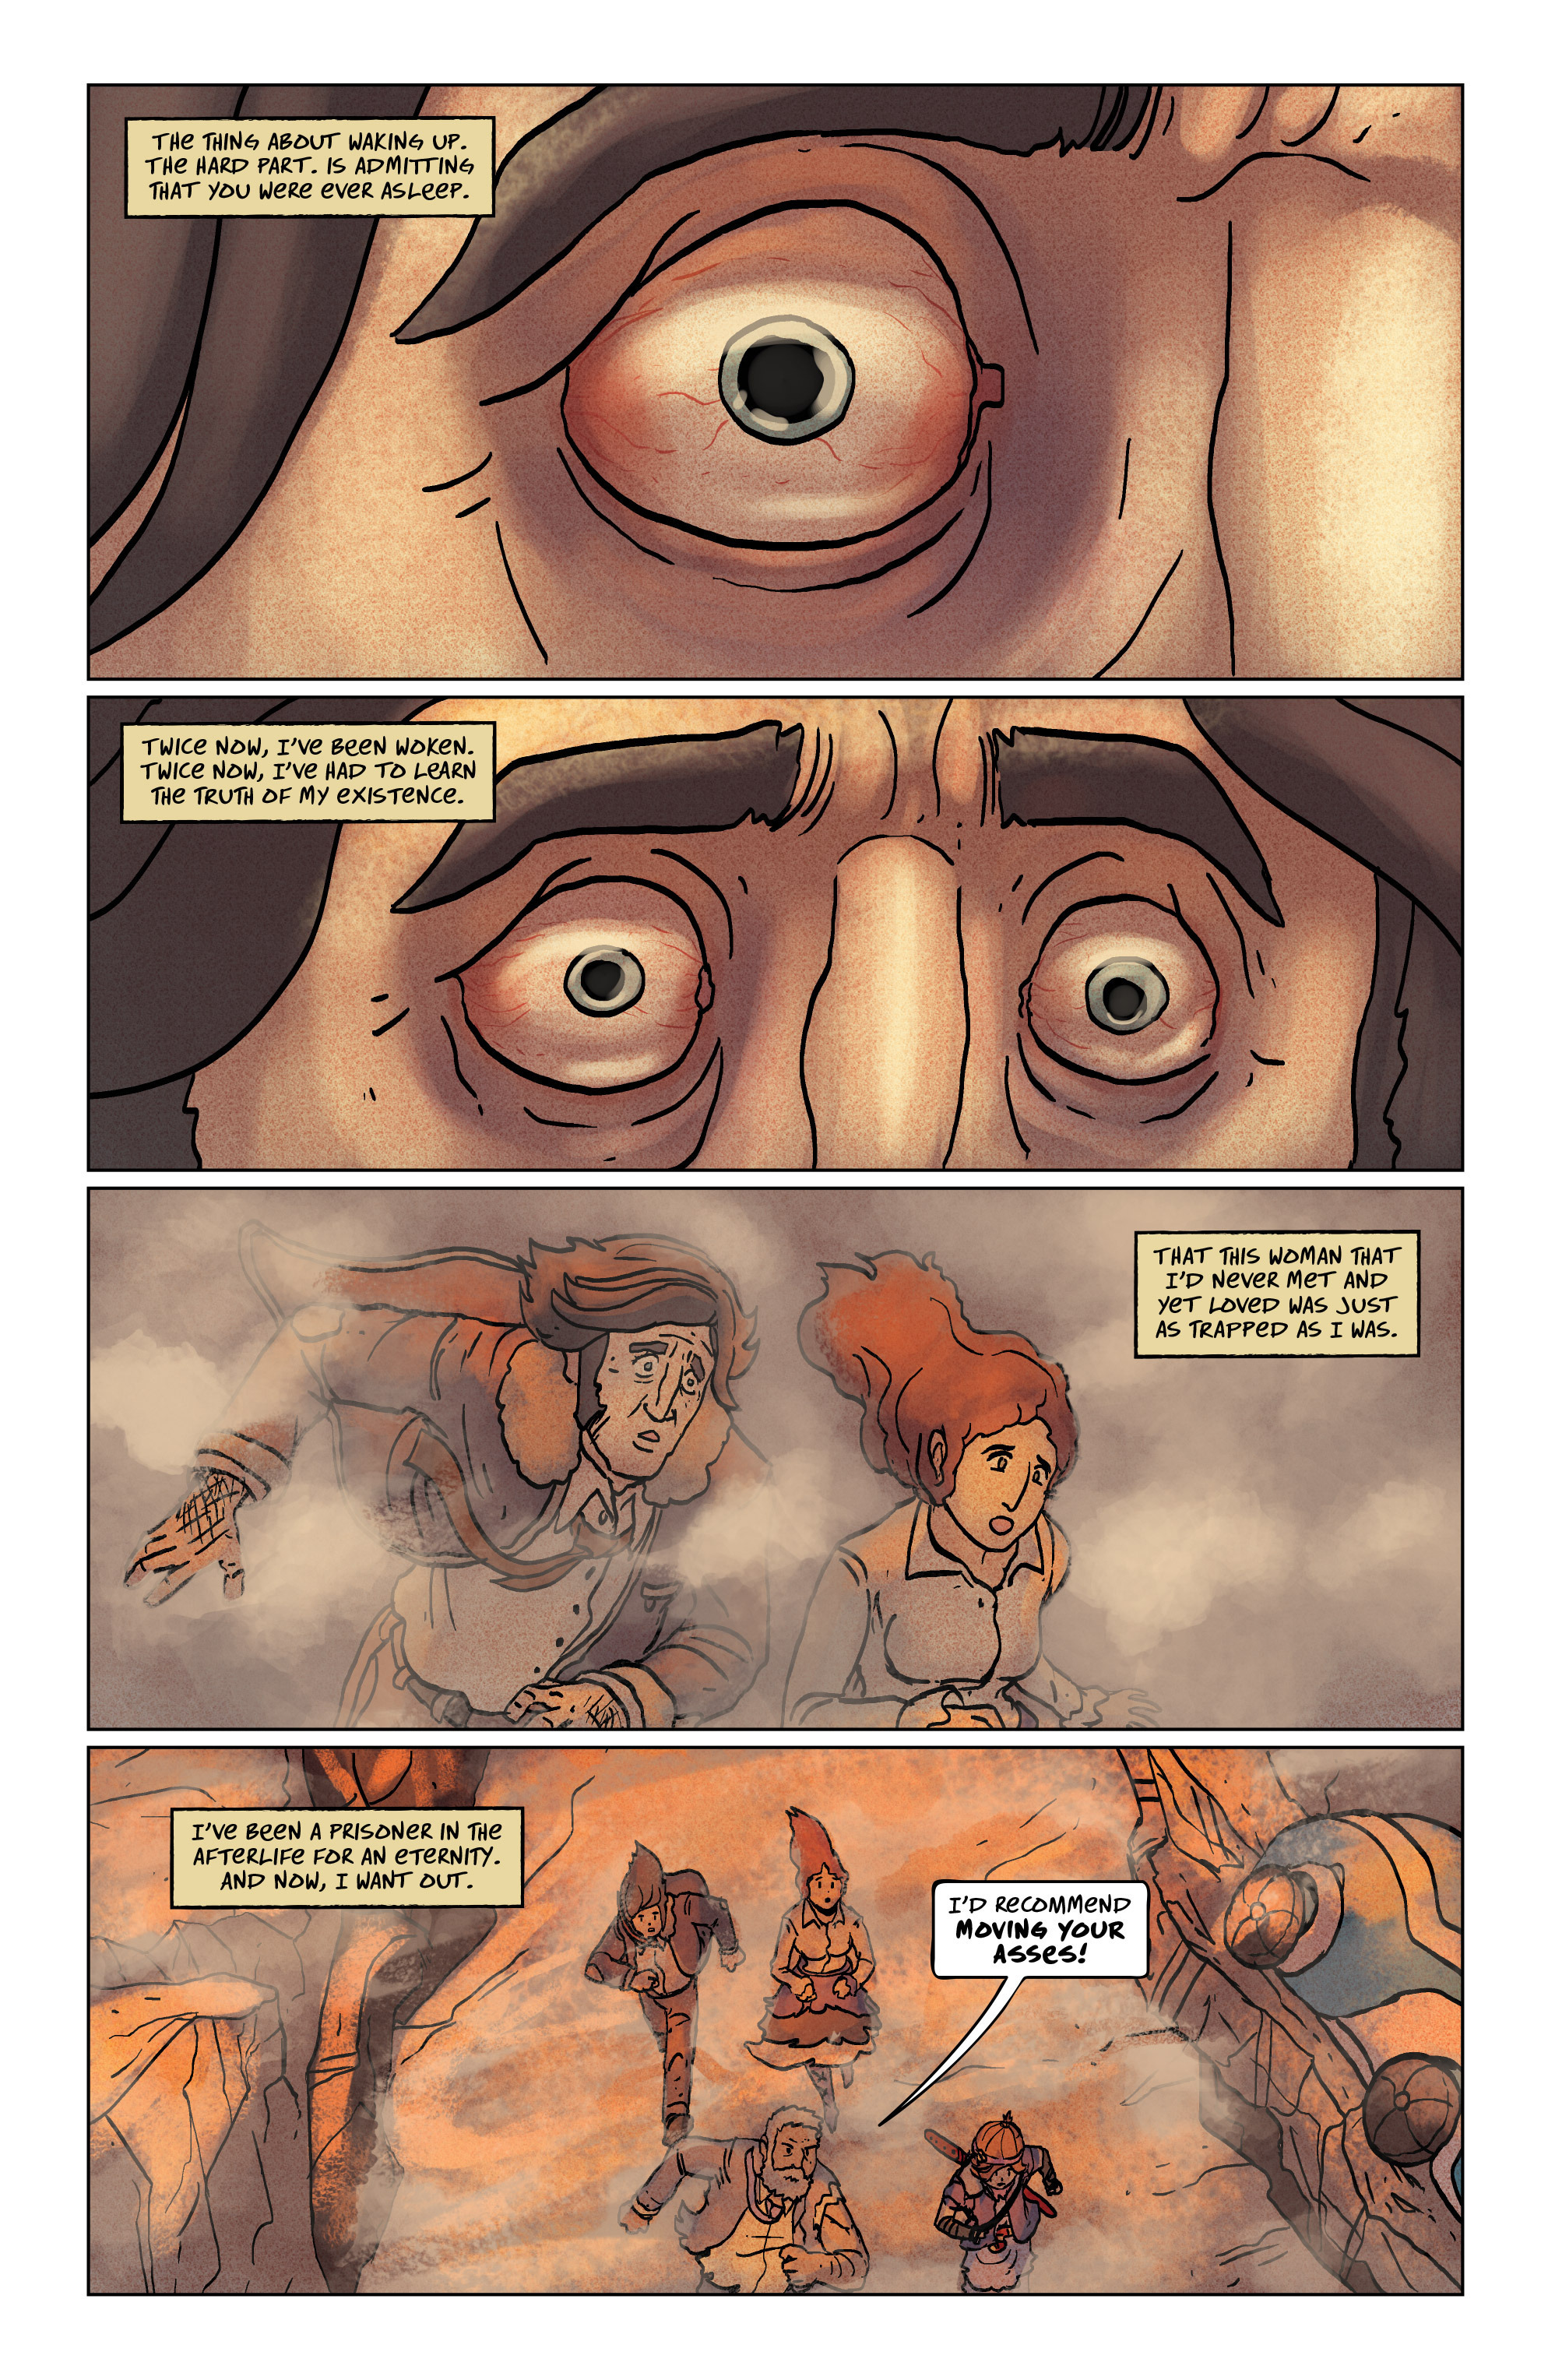 Exodus: The Life After (2015-): Chapter 5 - Page 3